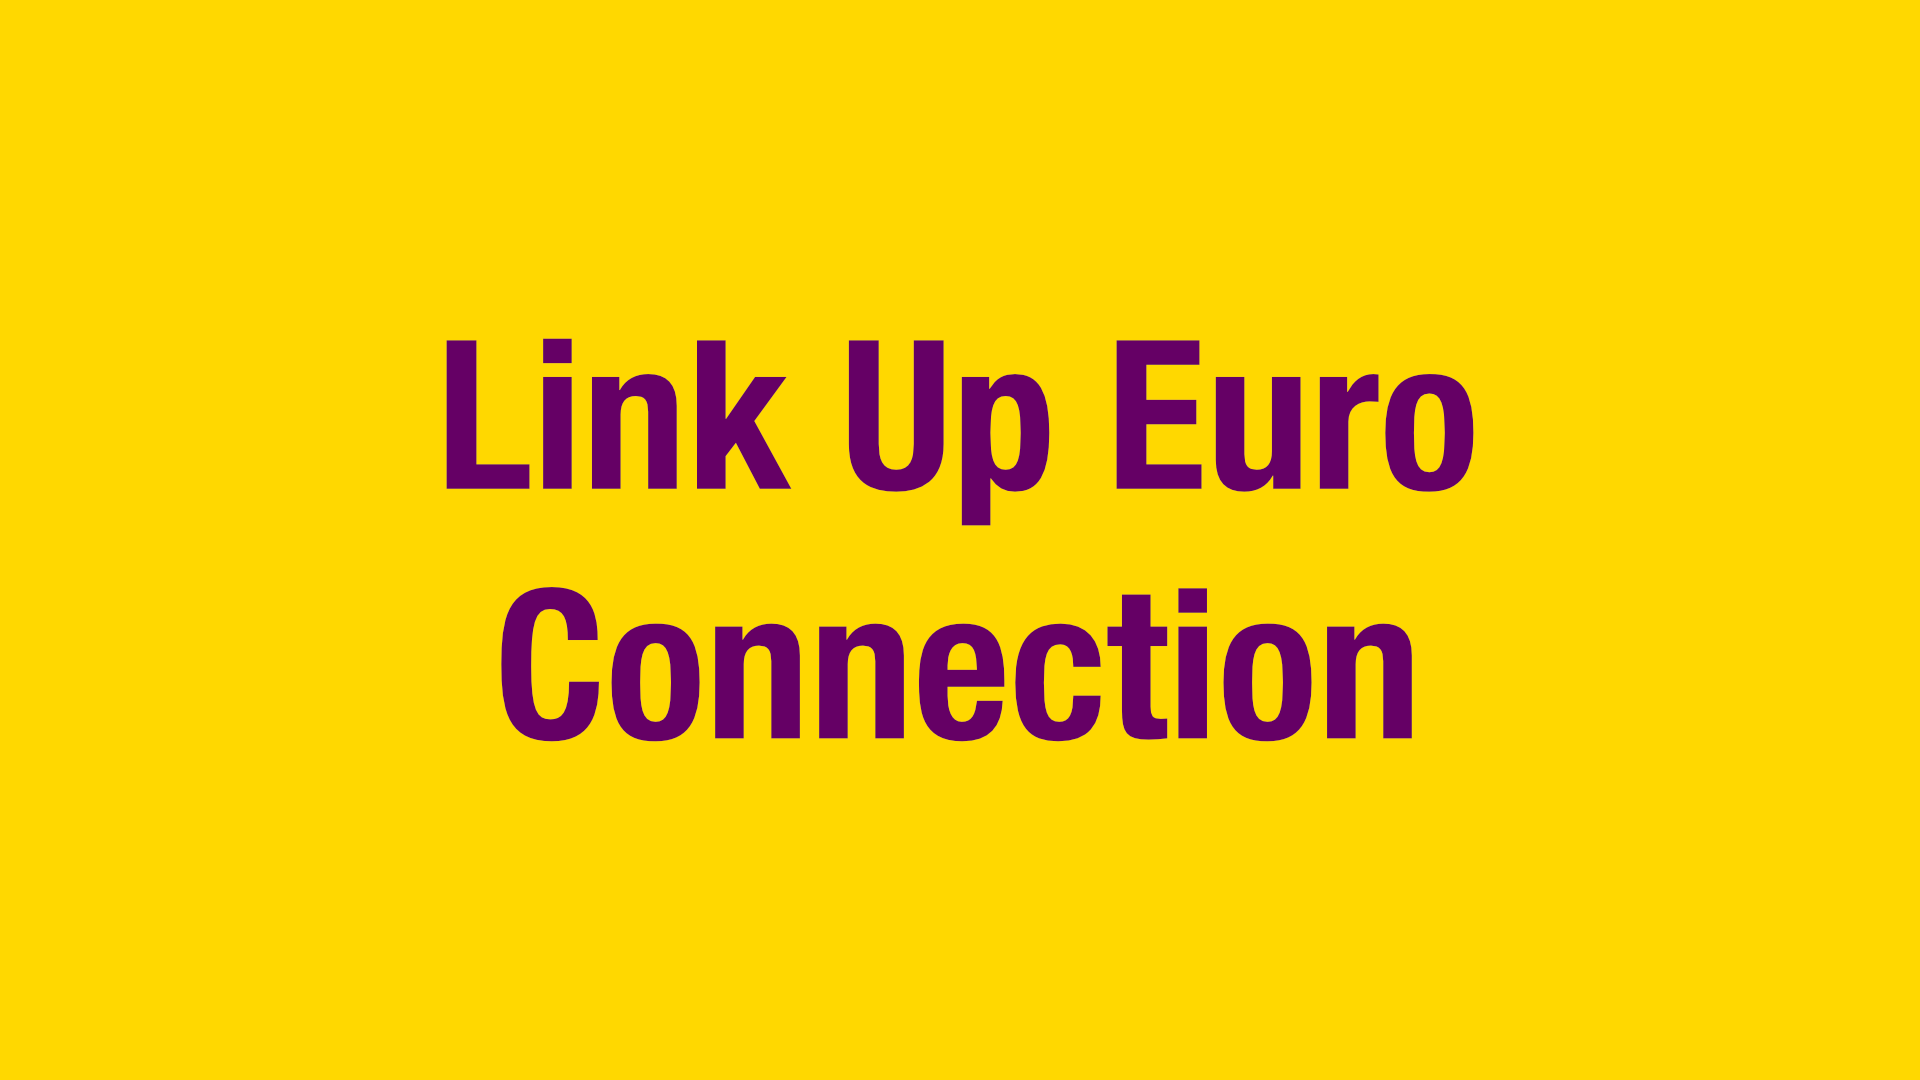 Link Up Euro Connection